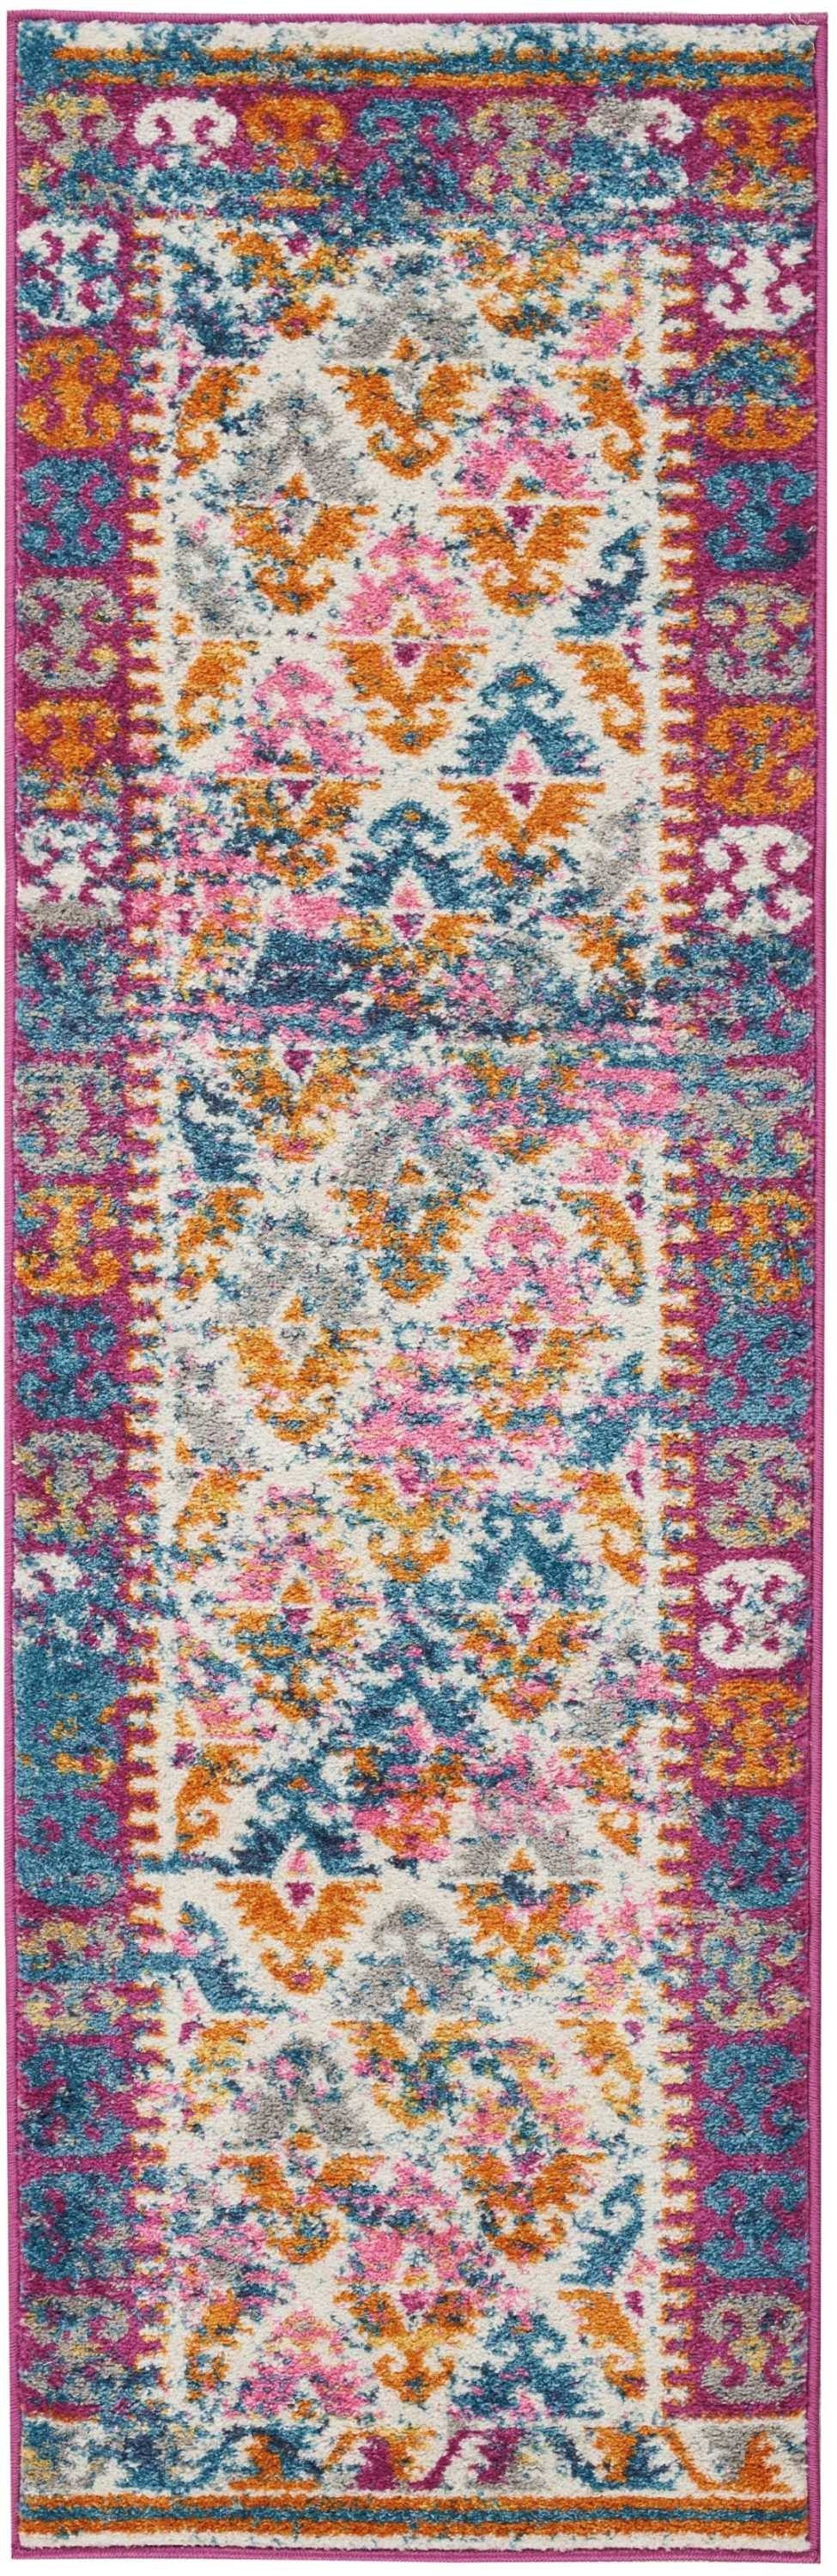 2’ X 3’ Ivory And Magenta Tribal Pattern Scatter Rug